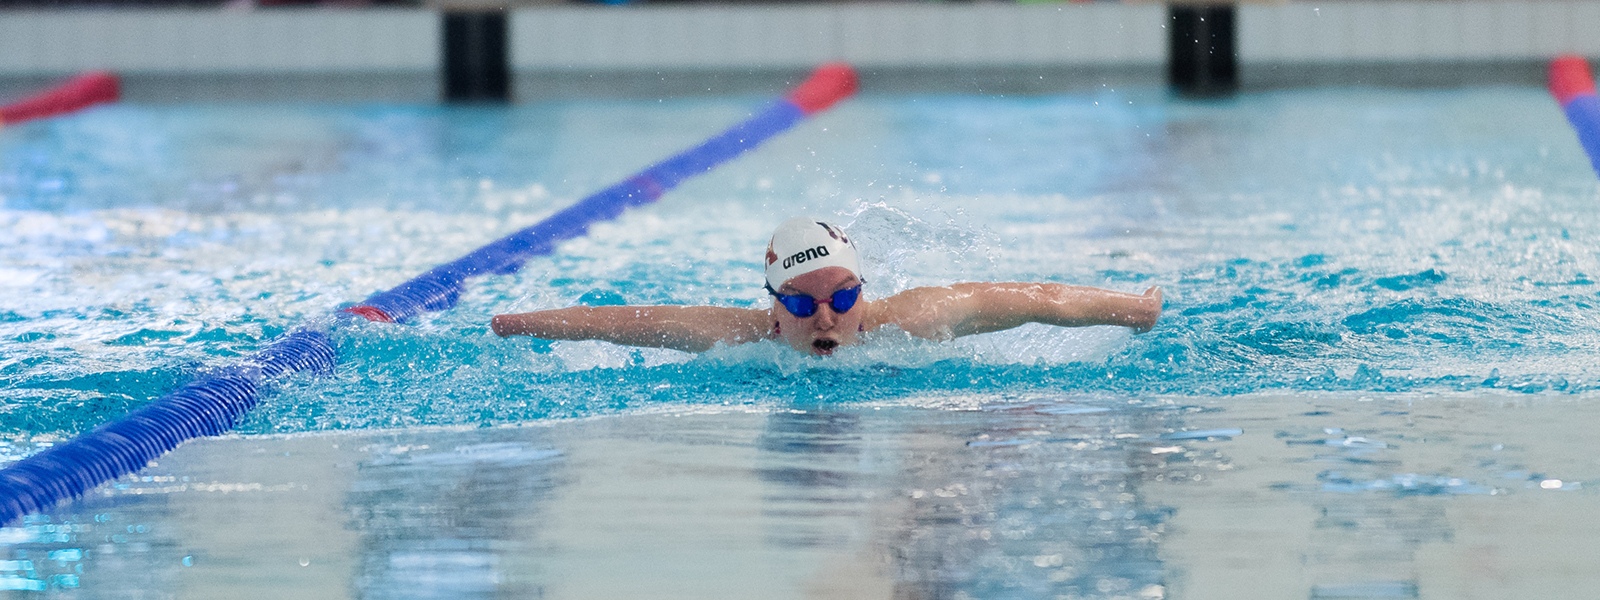 Toni Shaw competes in a swim race